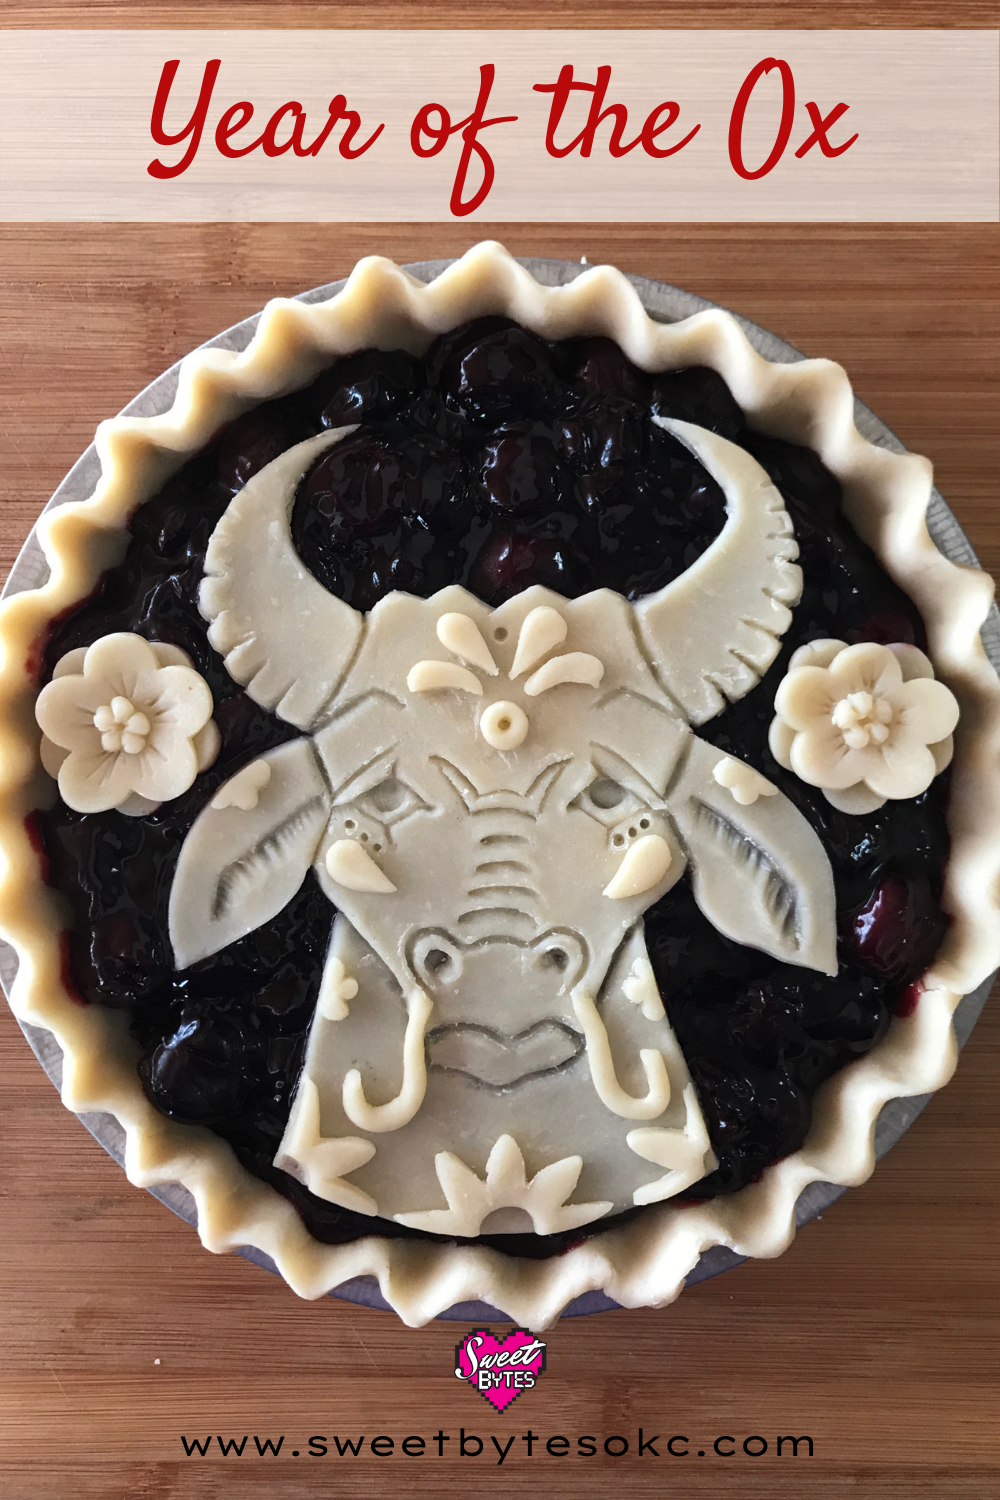 Hand Sculpted Ox made out of pie crust decorating a cherry pie for Lunar New Year